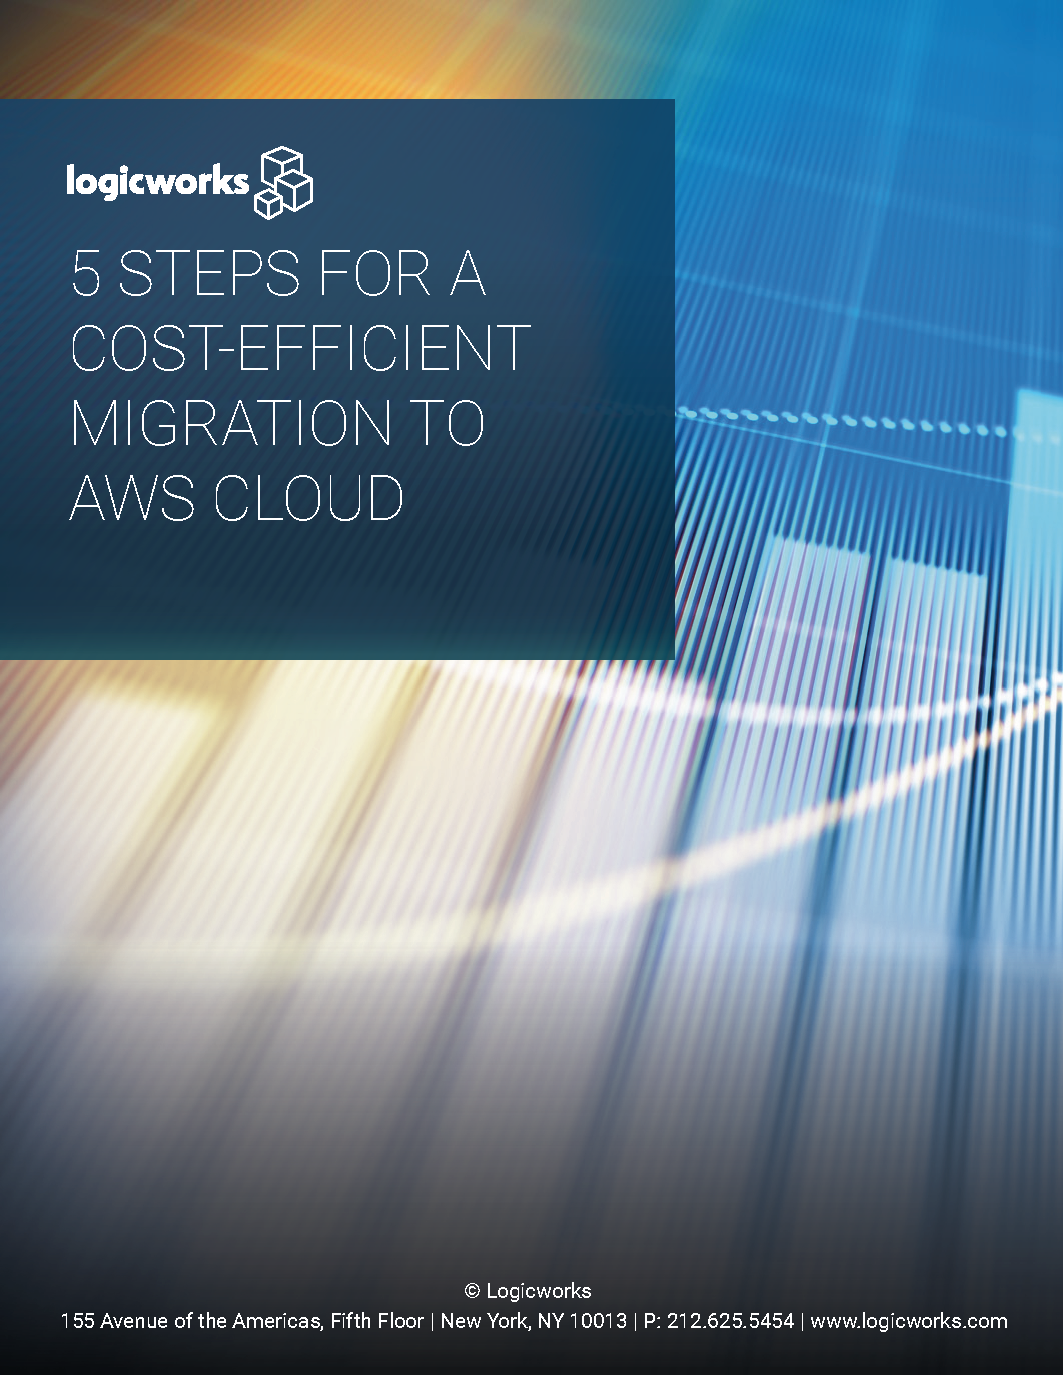 Logicworks eBook - 5 Steps for a Cost-Efficient Migration to AWS